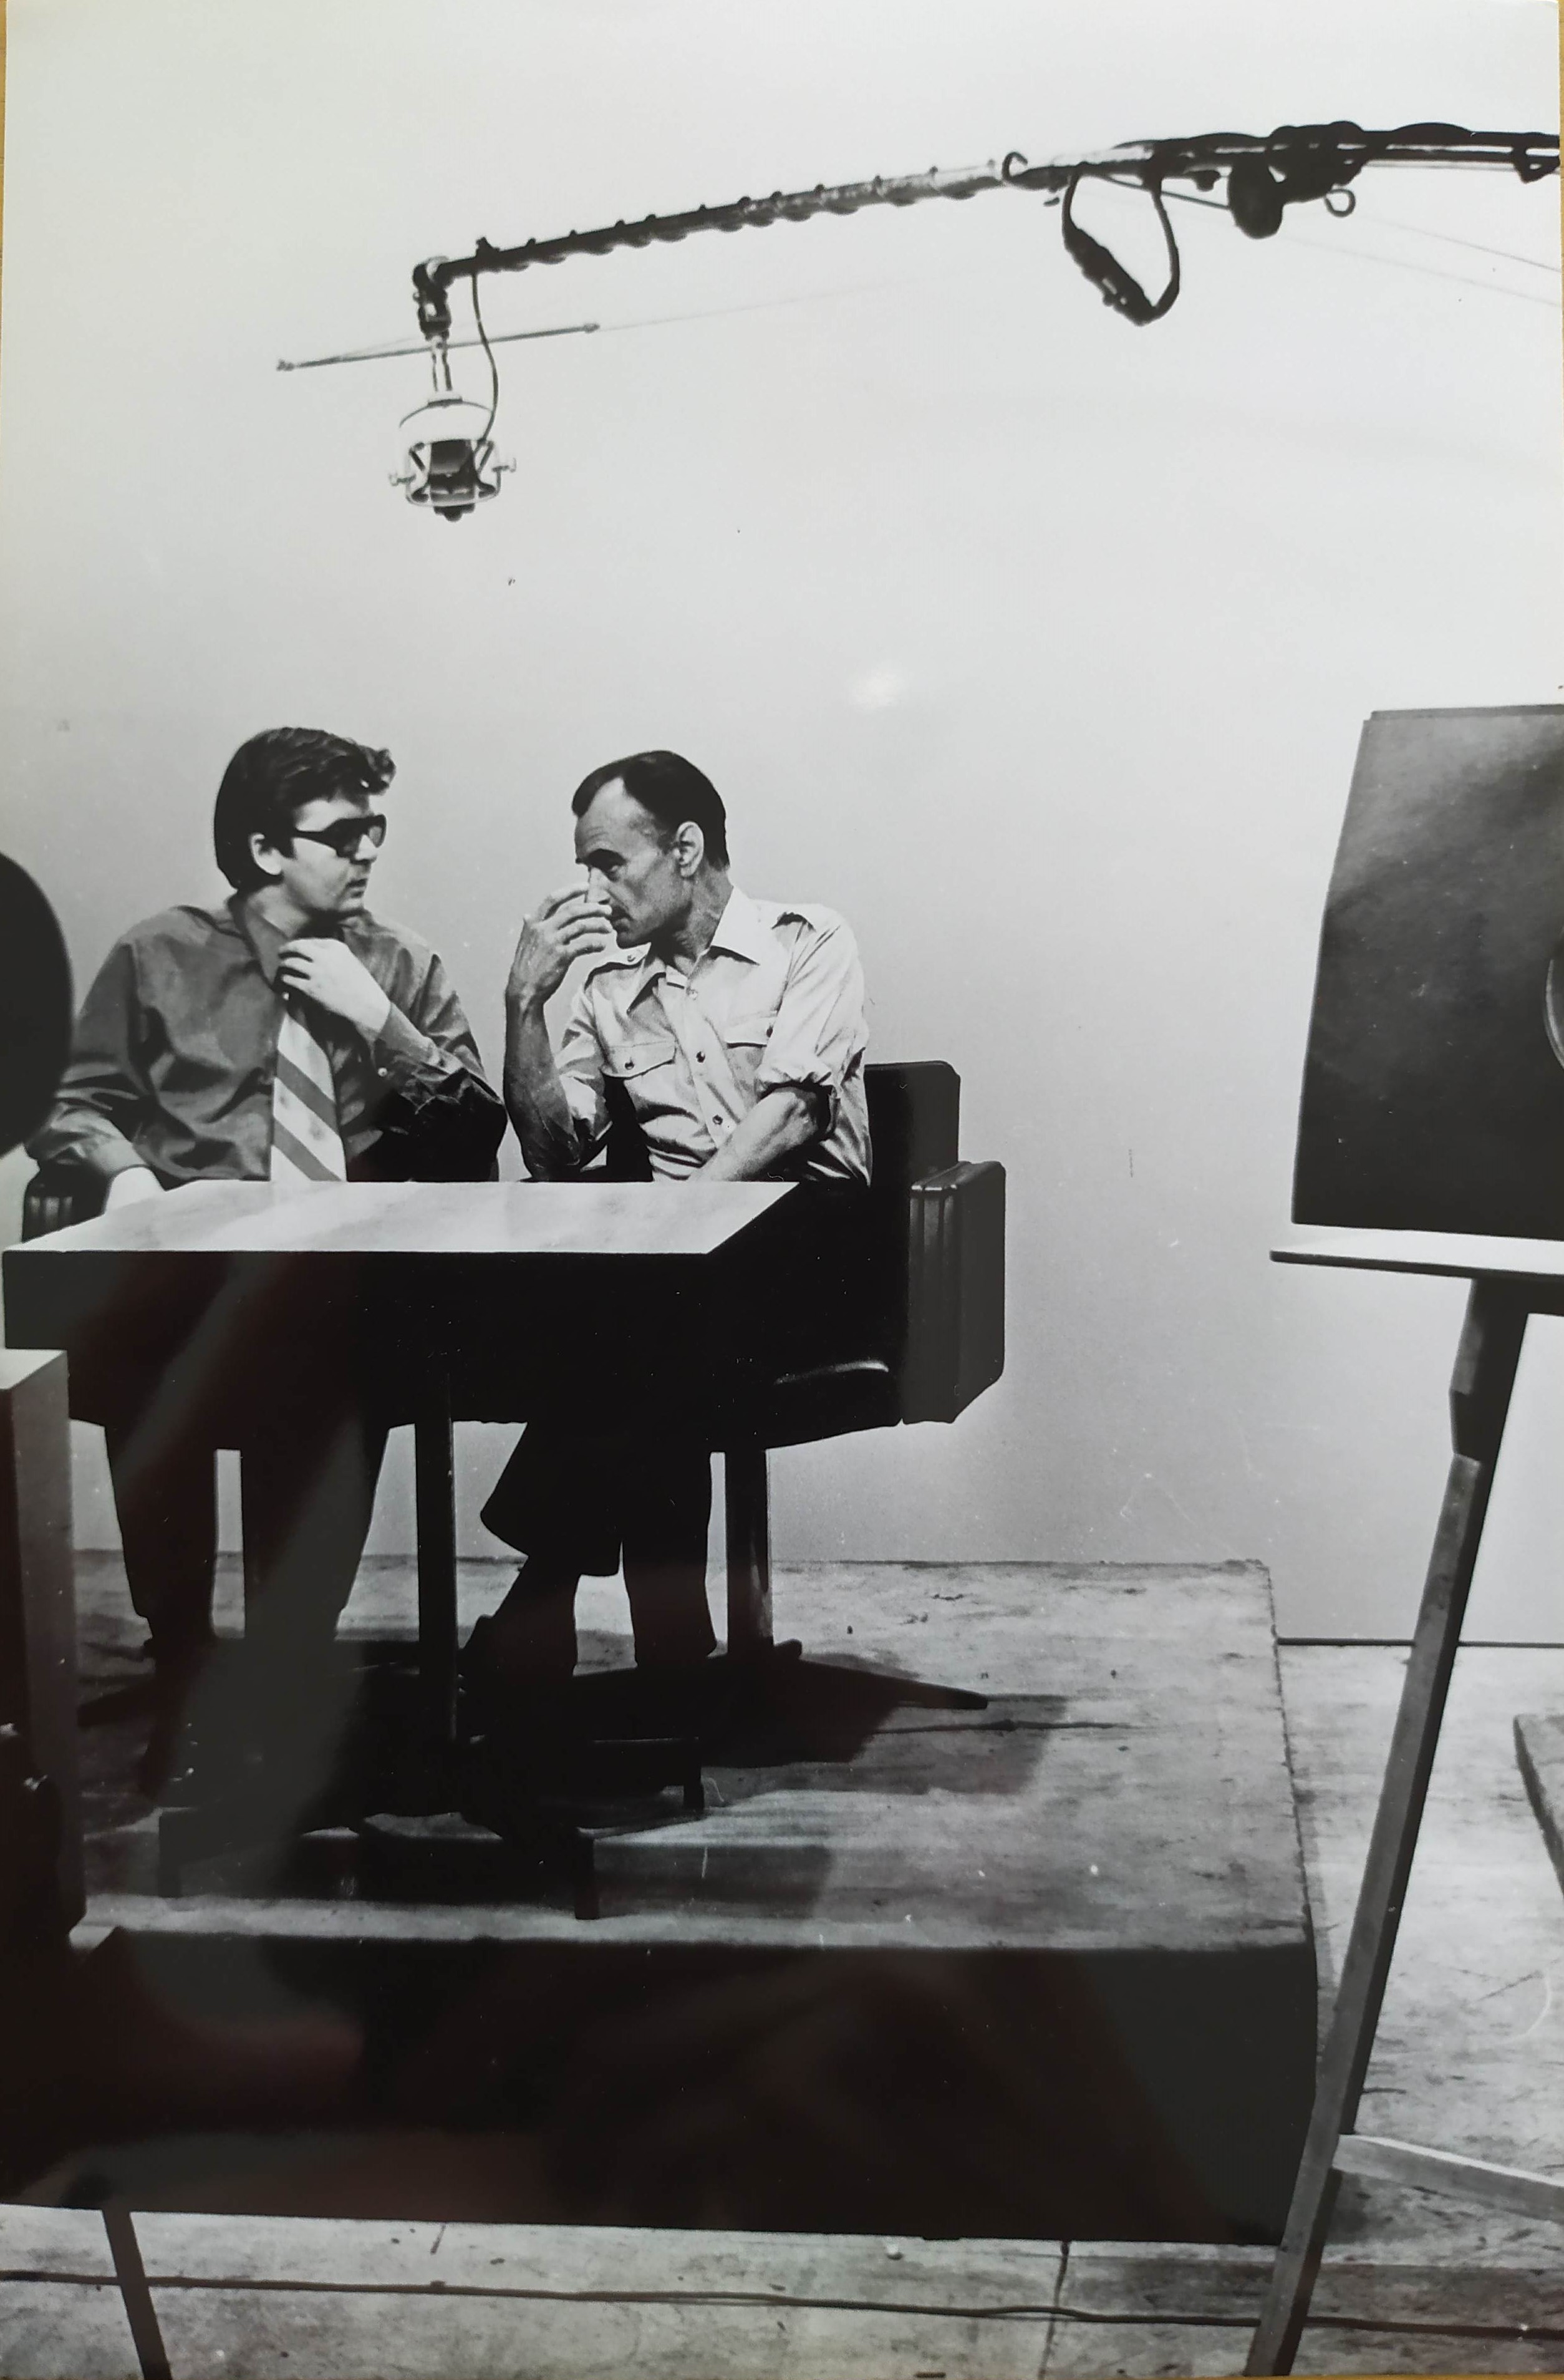 Photo from an interview by Maciej Piotrowski for Polish Television, 1978